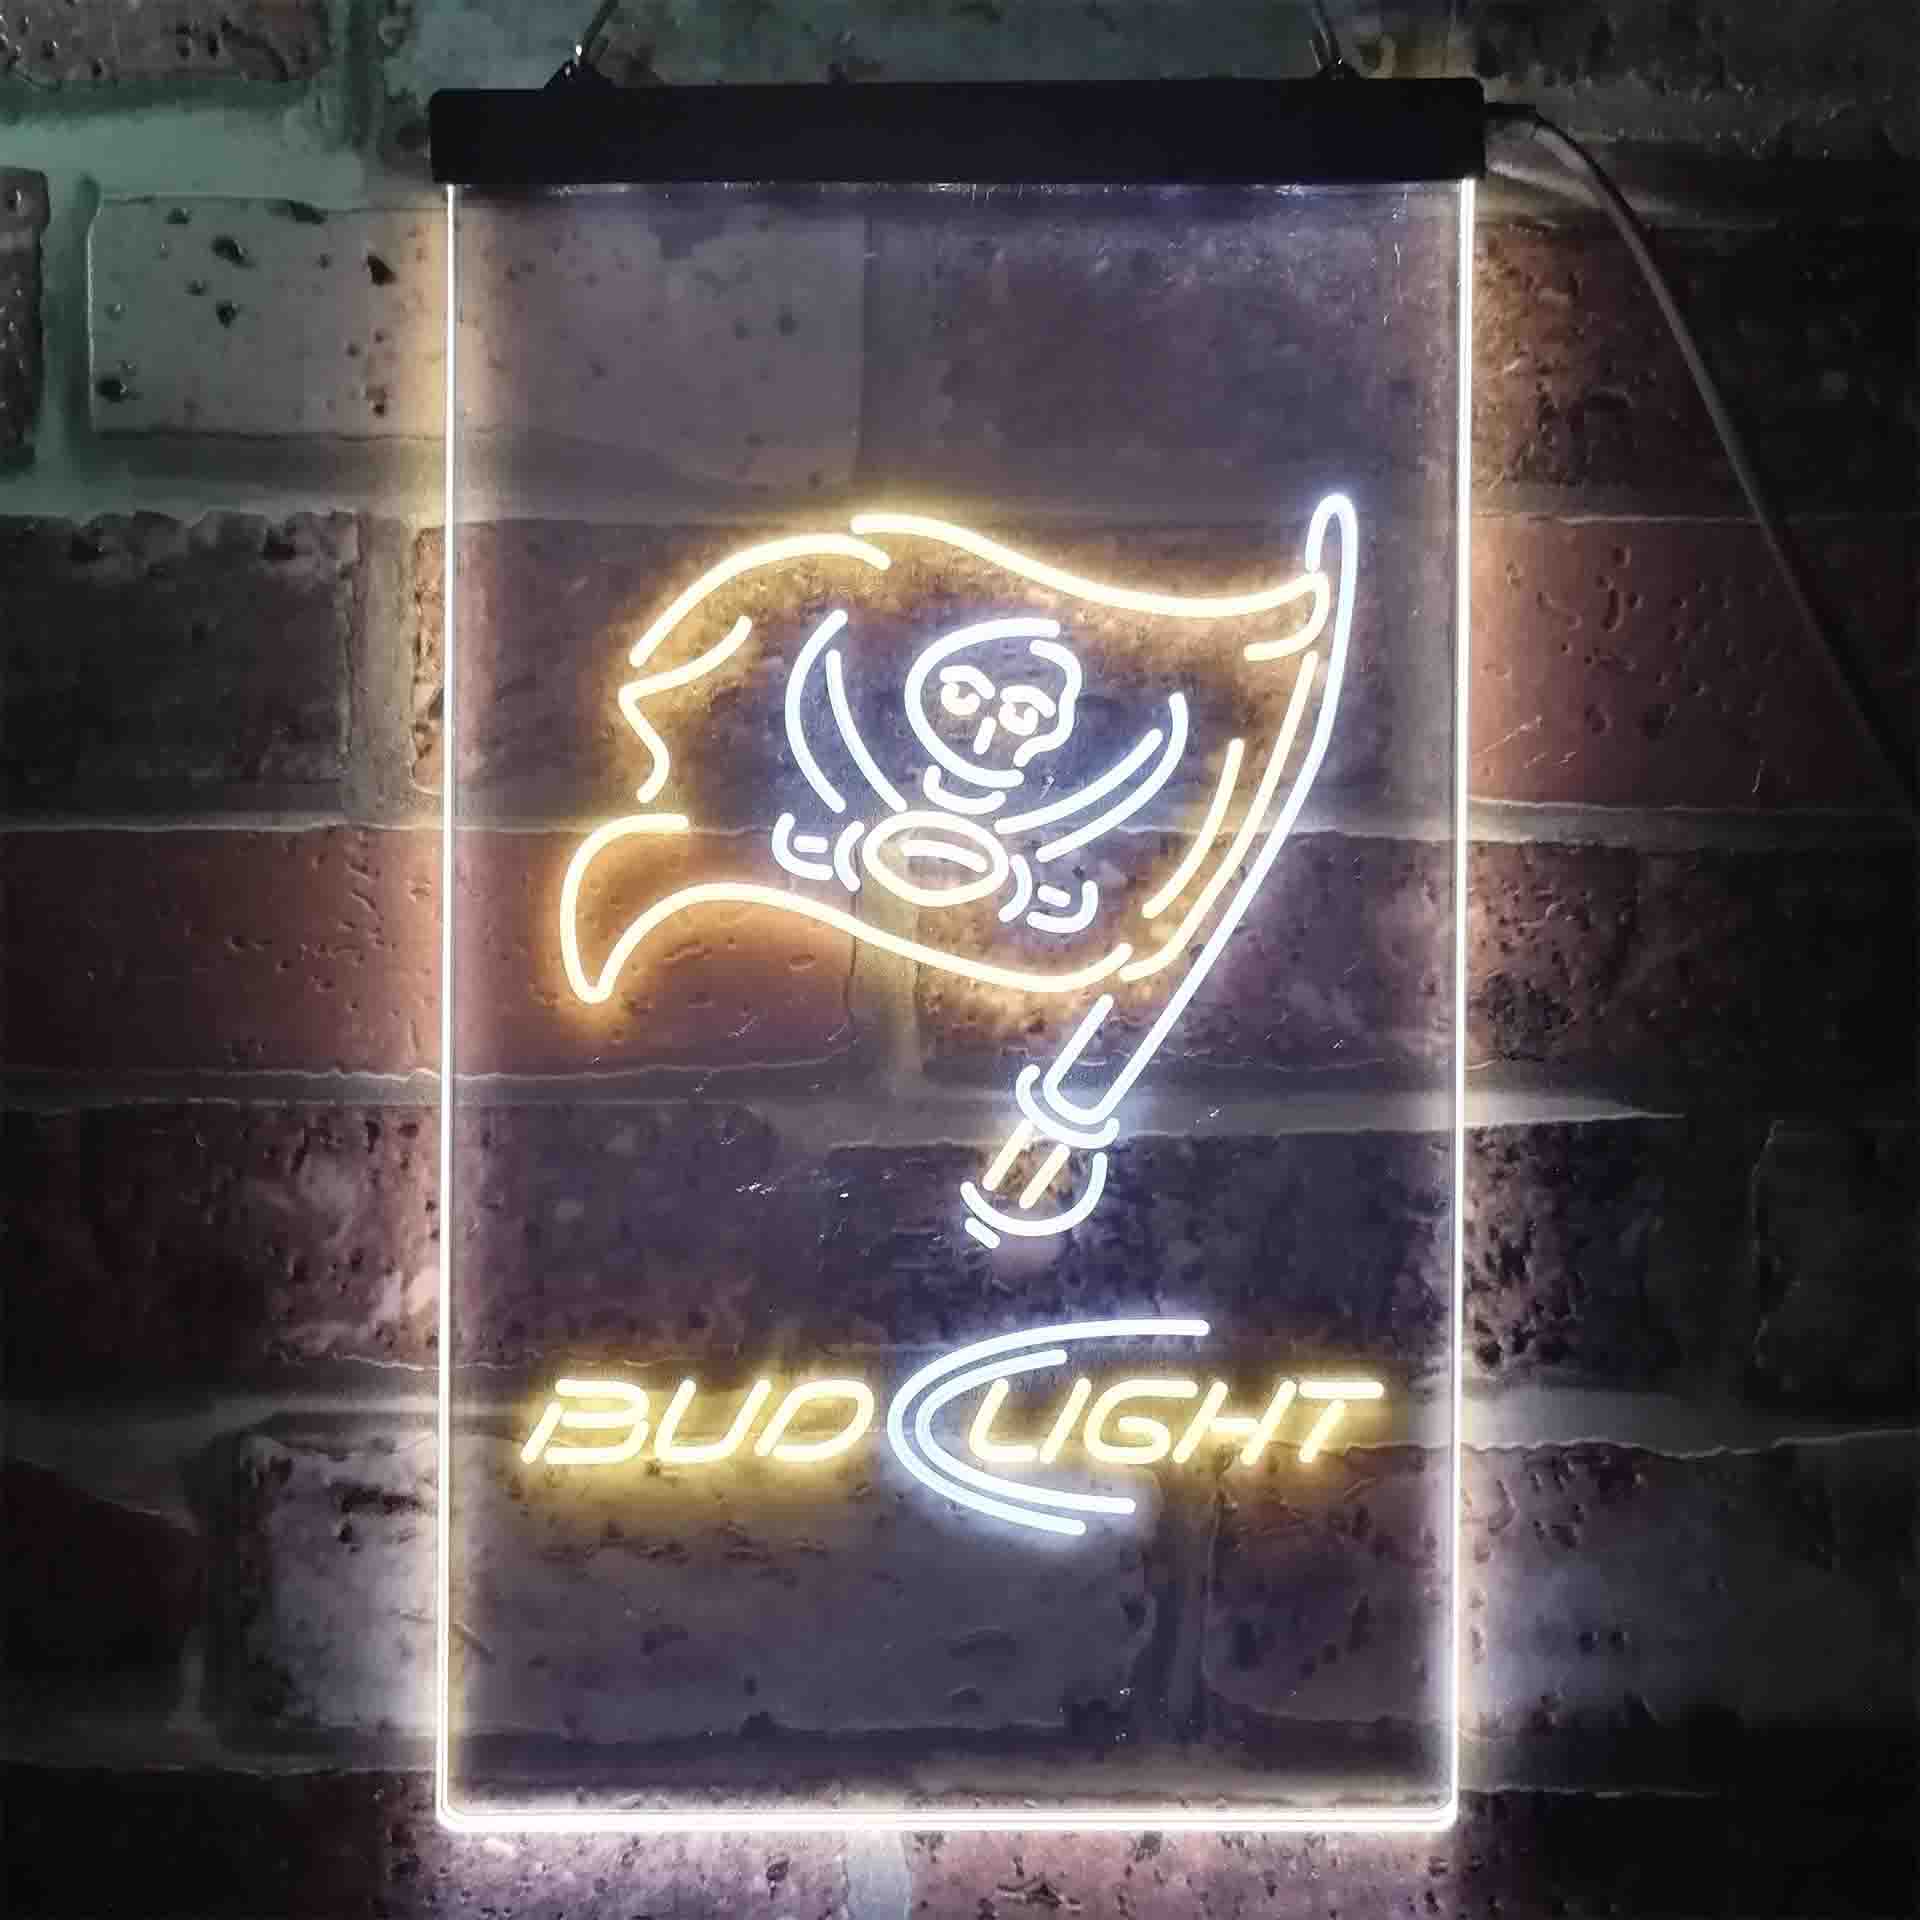 Bud Light Tampa Bay Buccaneers Dual Color LED Neon Sign ProLedSign